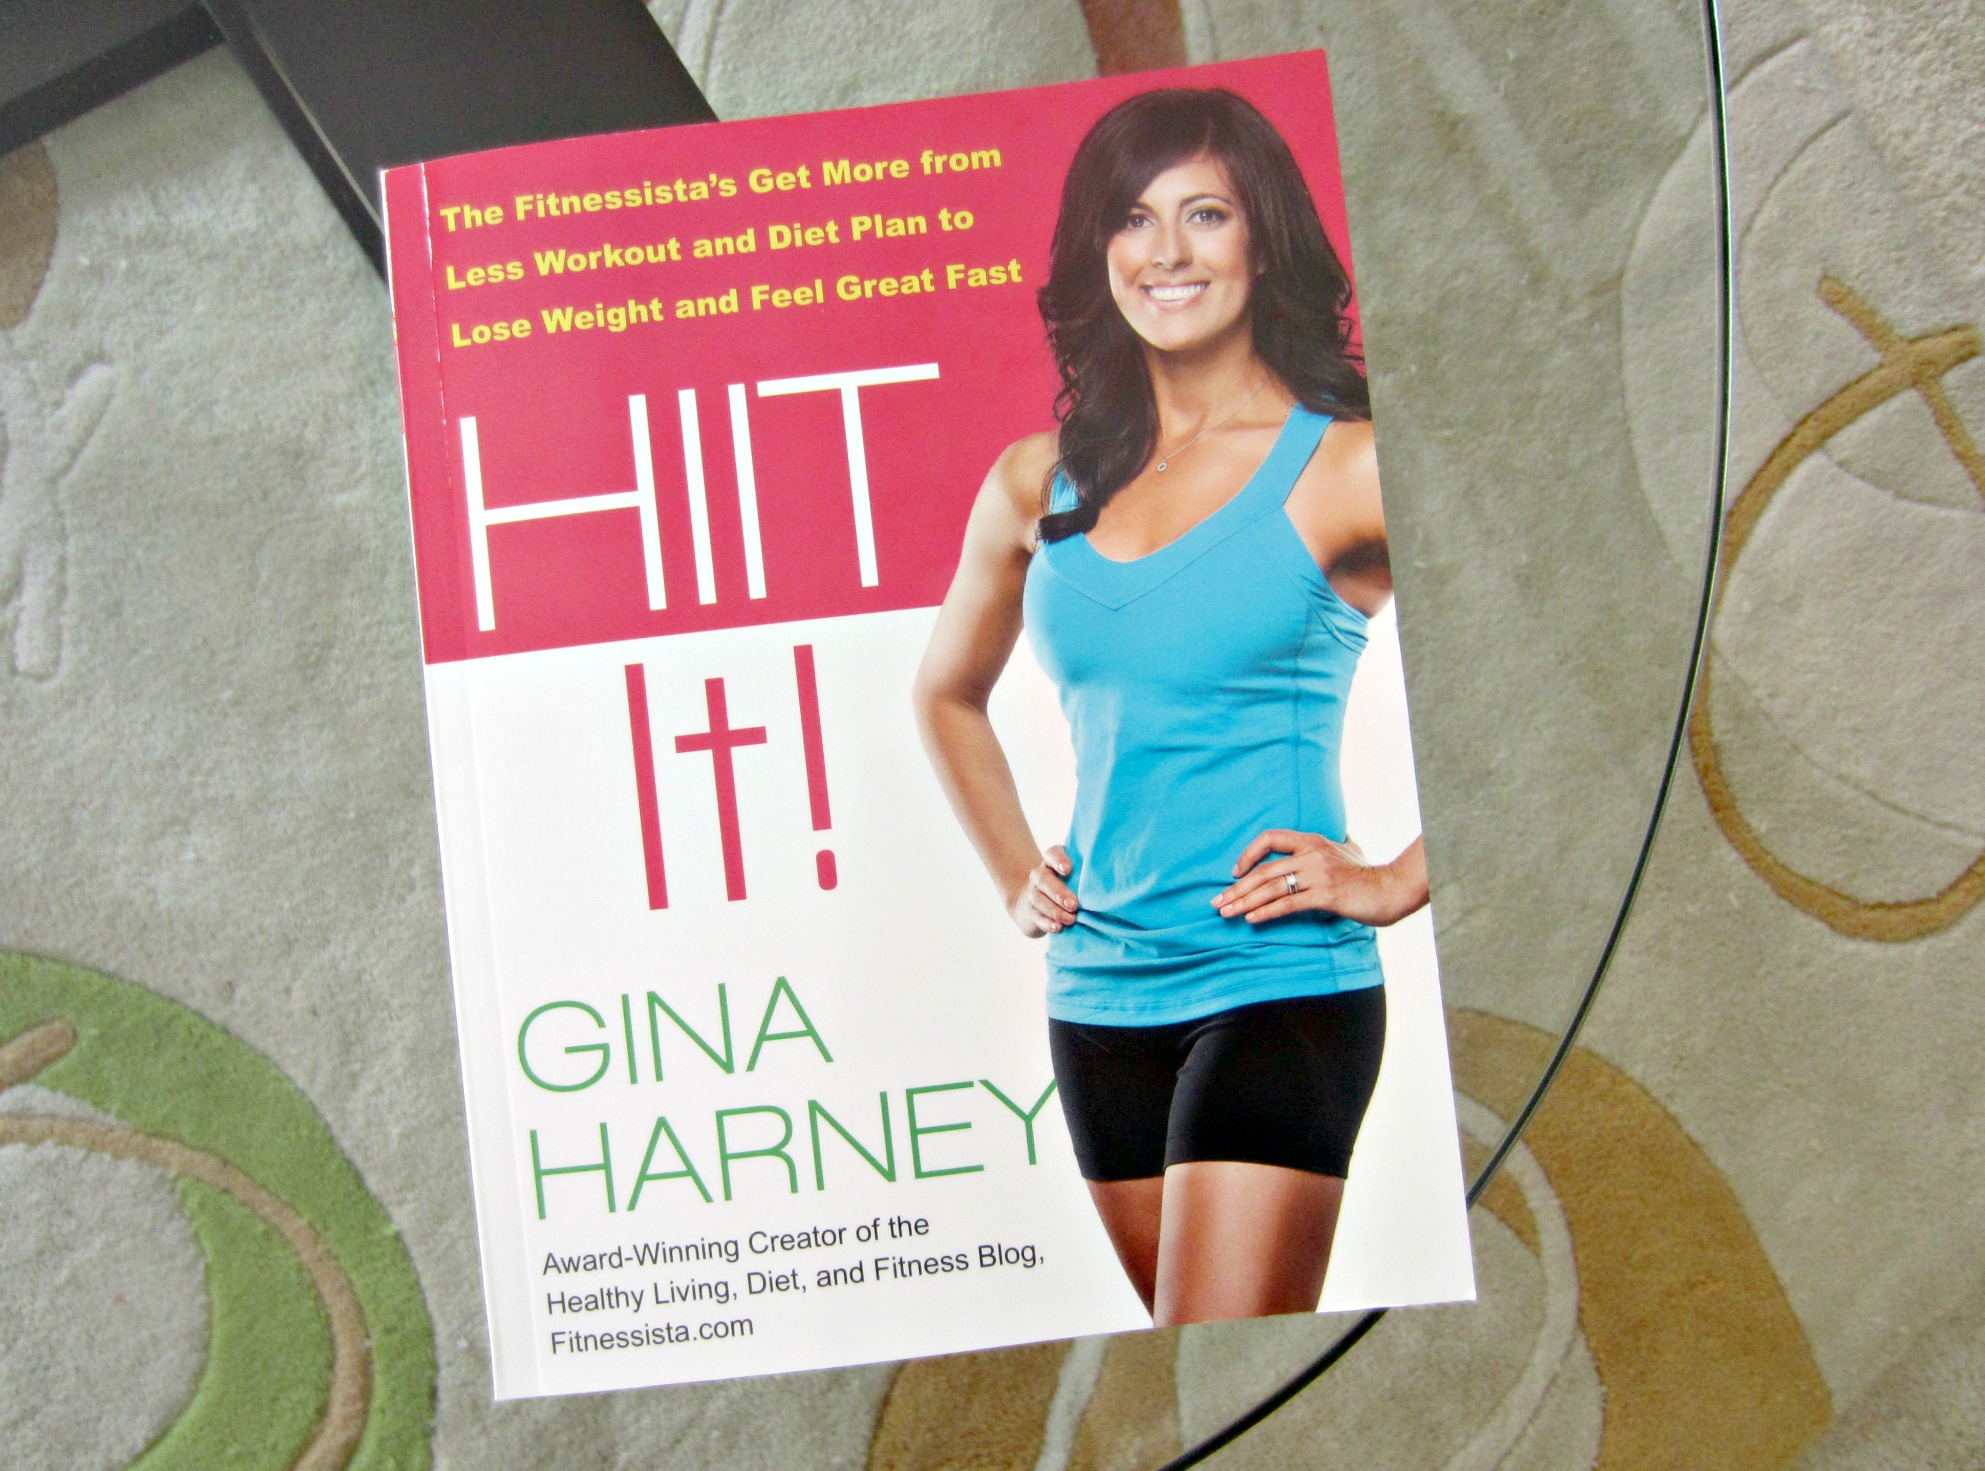 Fitnessista's HIIT It! book review